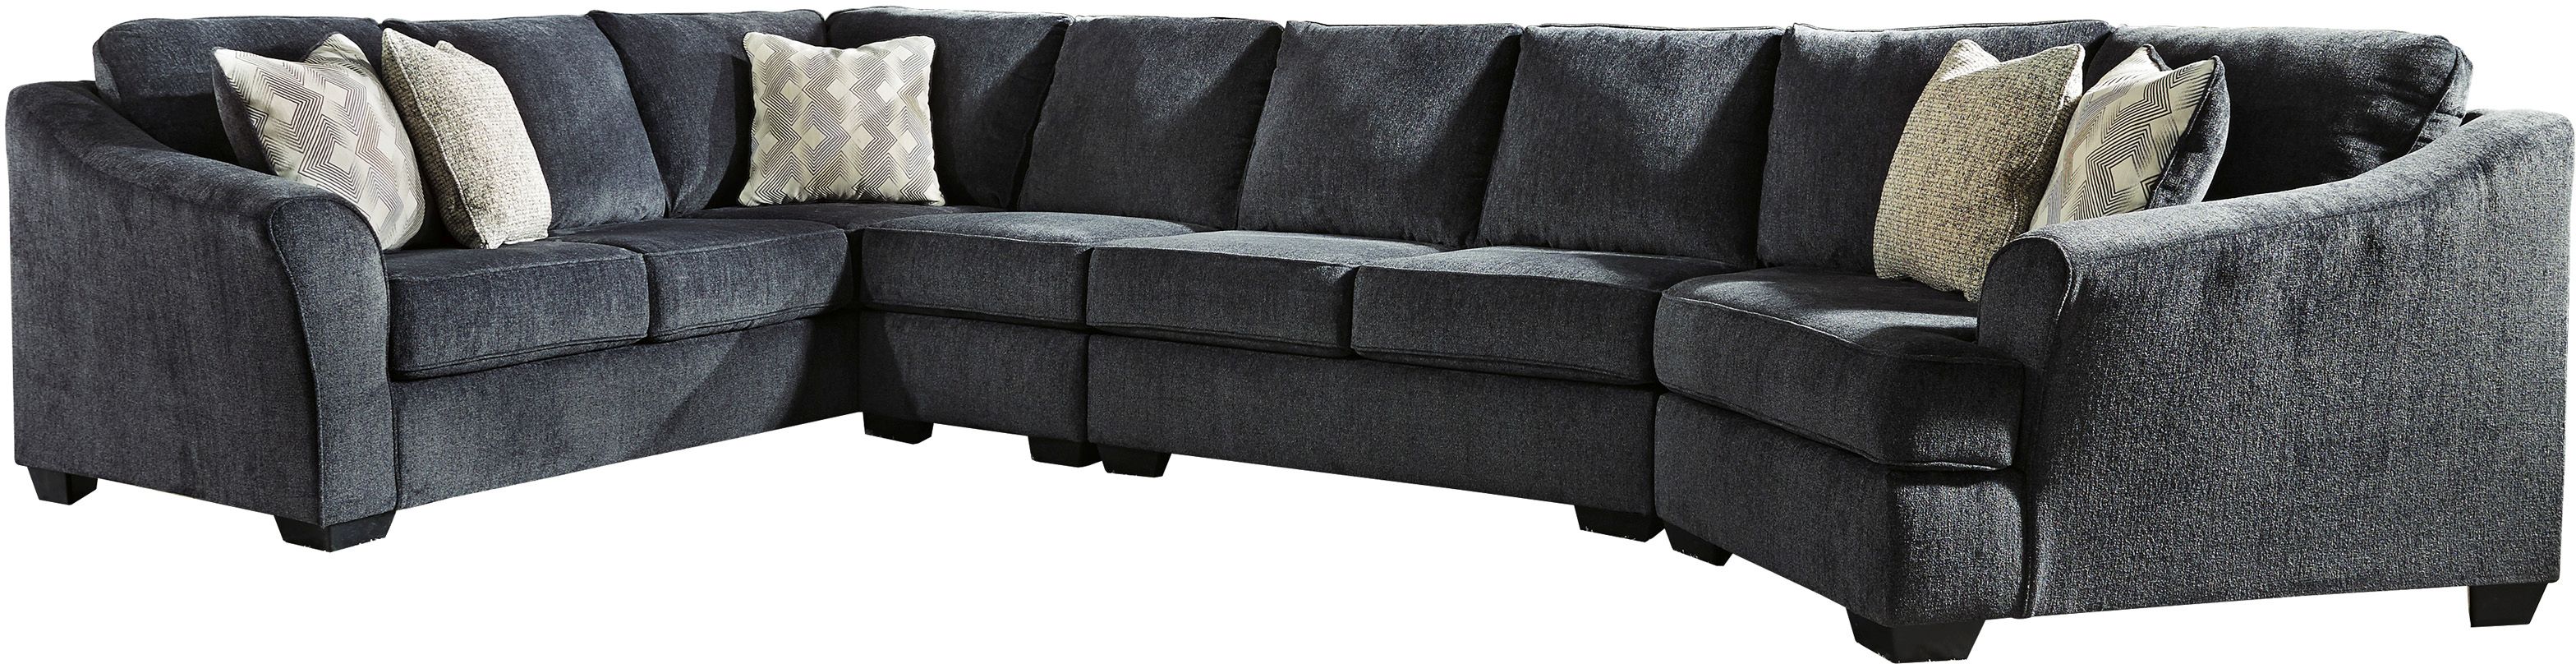 Signature Design by Ashley® Eltmann 4-Piece Slate Sectional with Cuddler